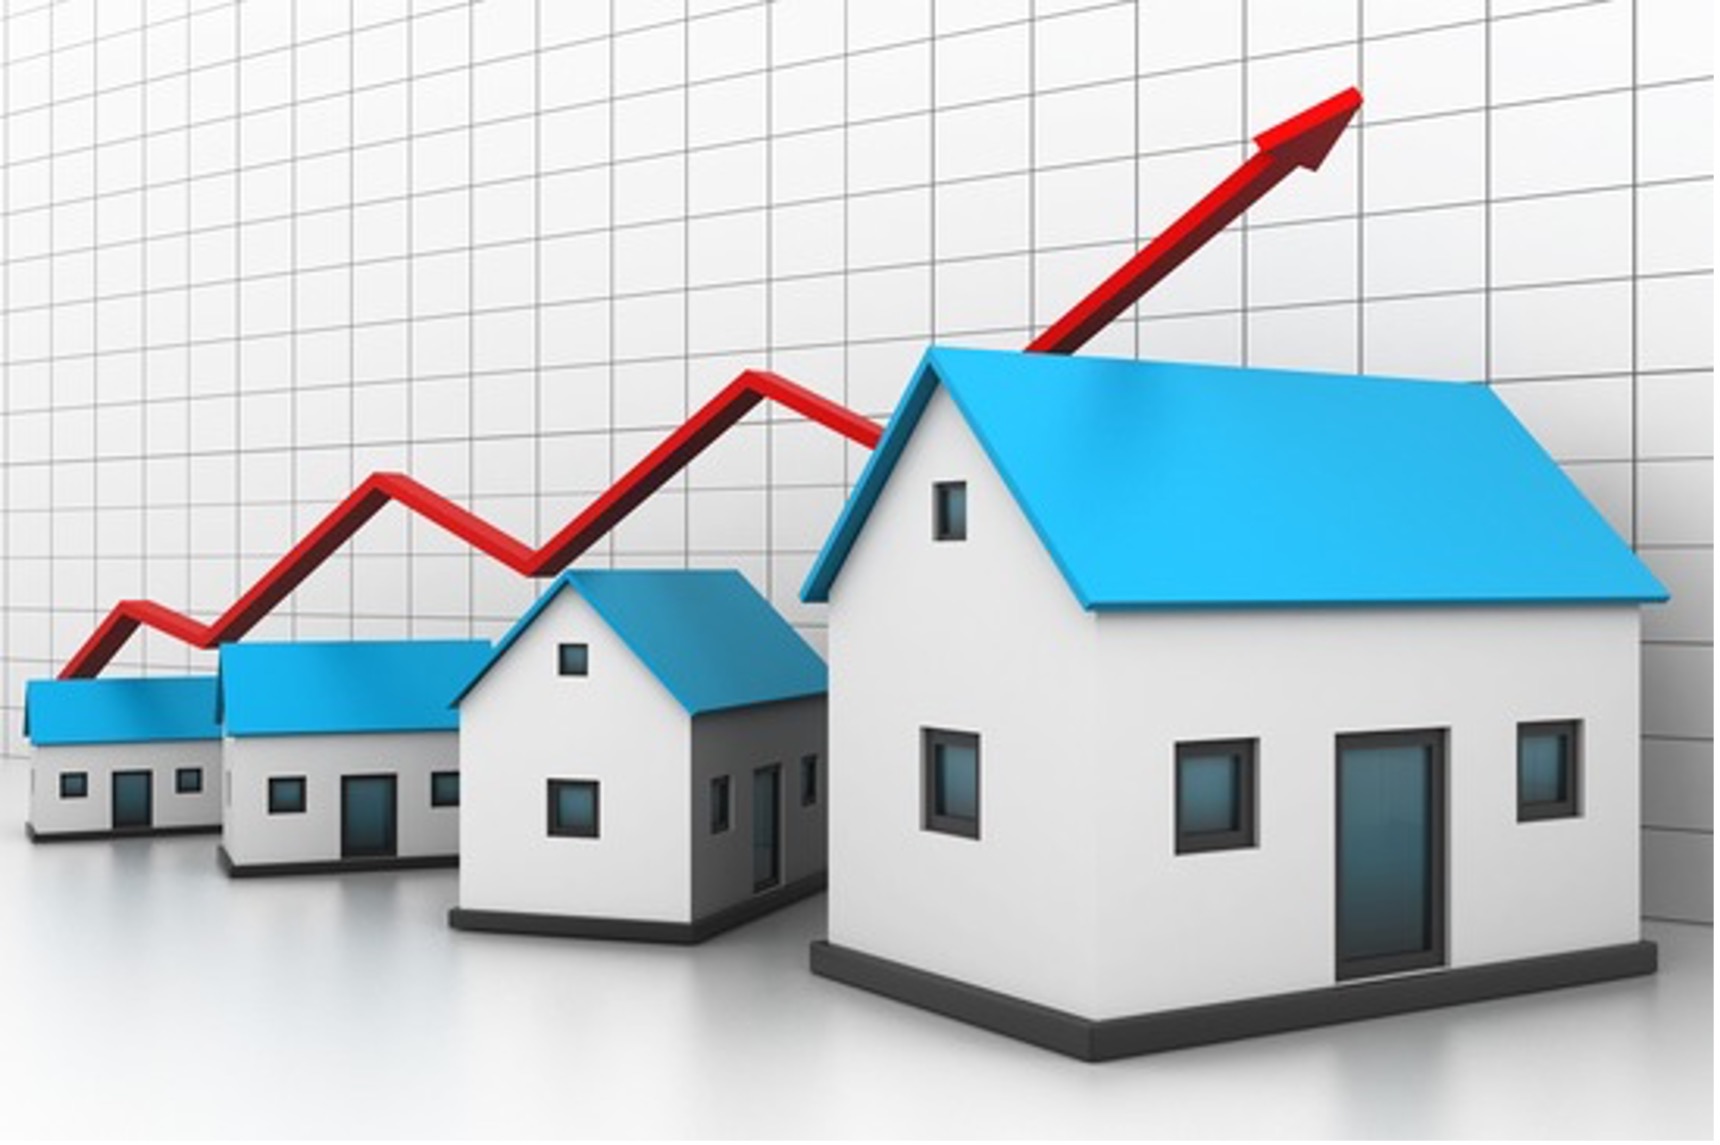 Local House Prices and Interest Rates